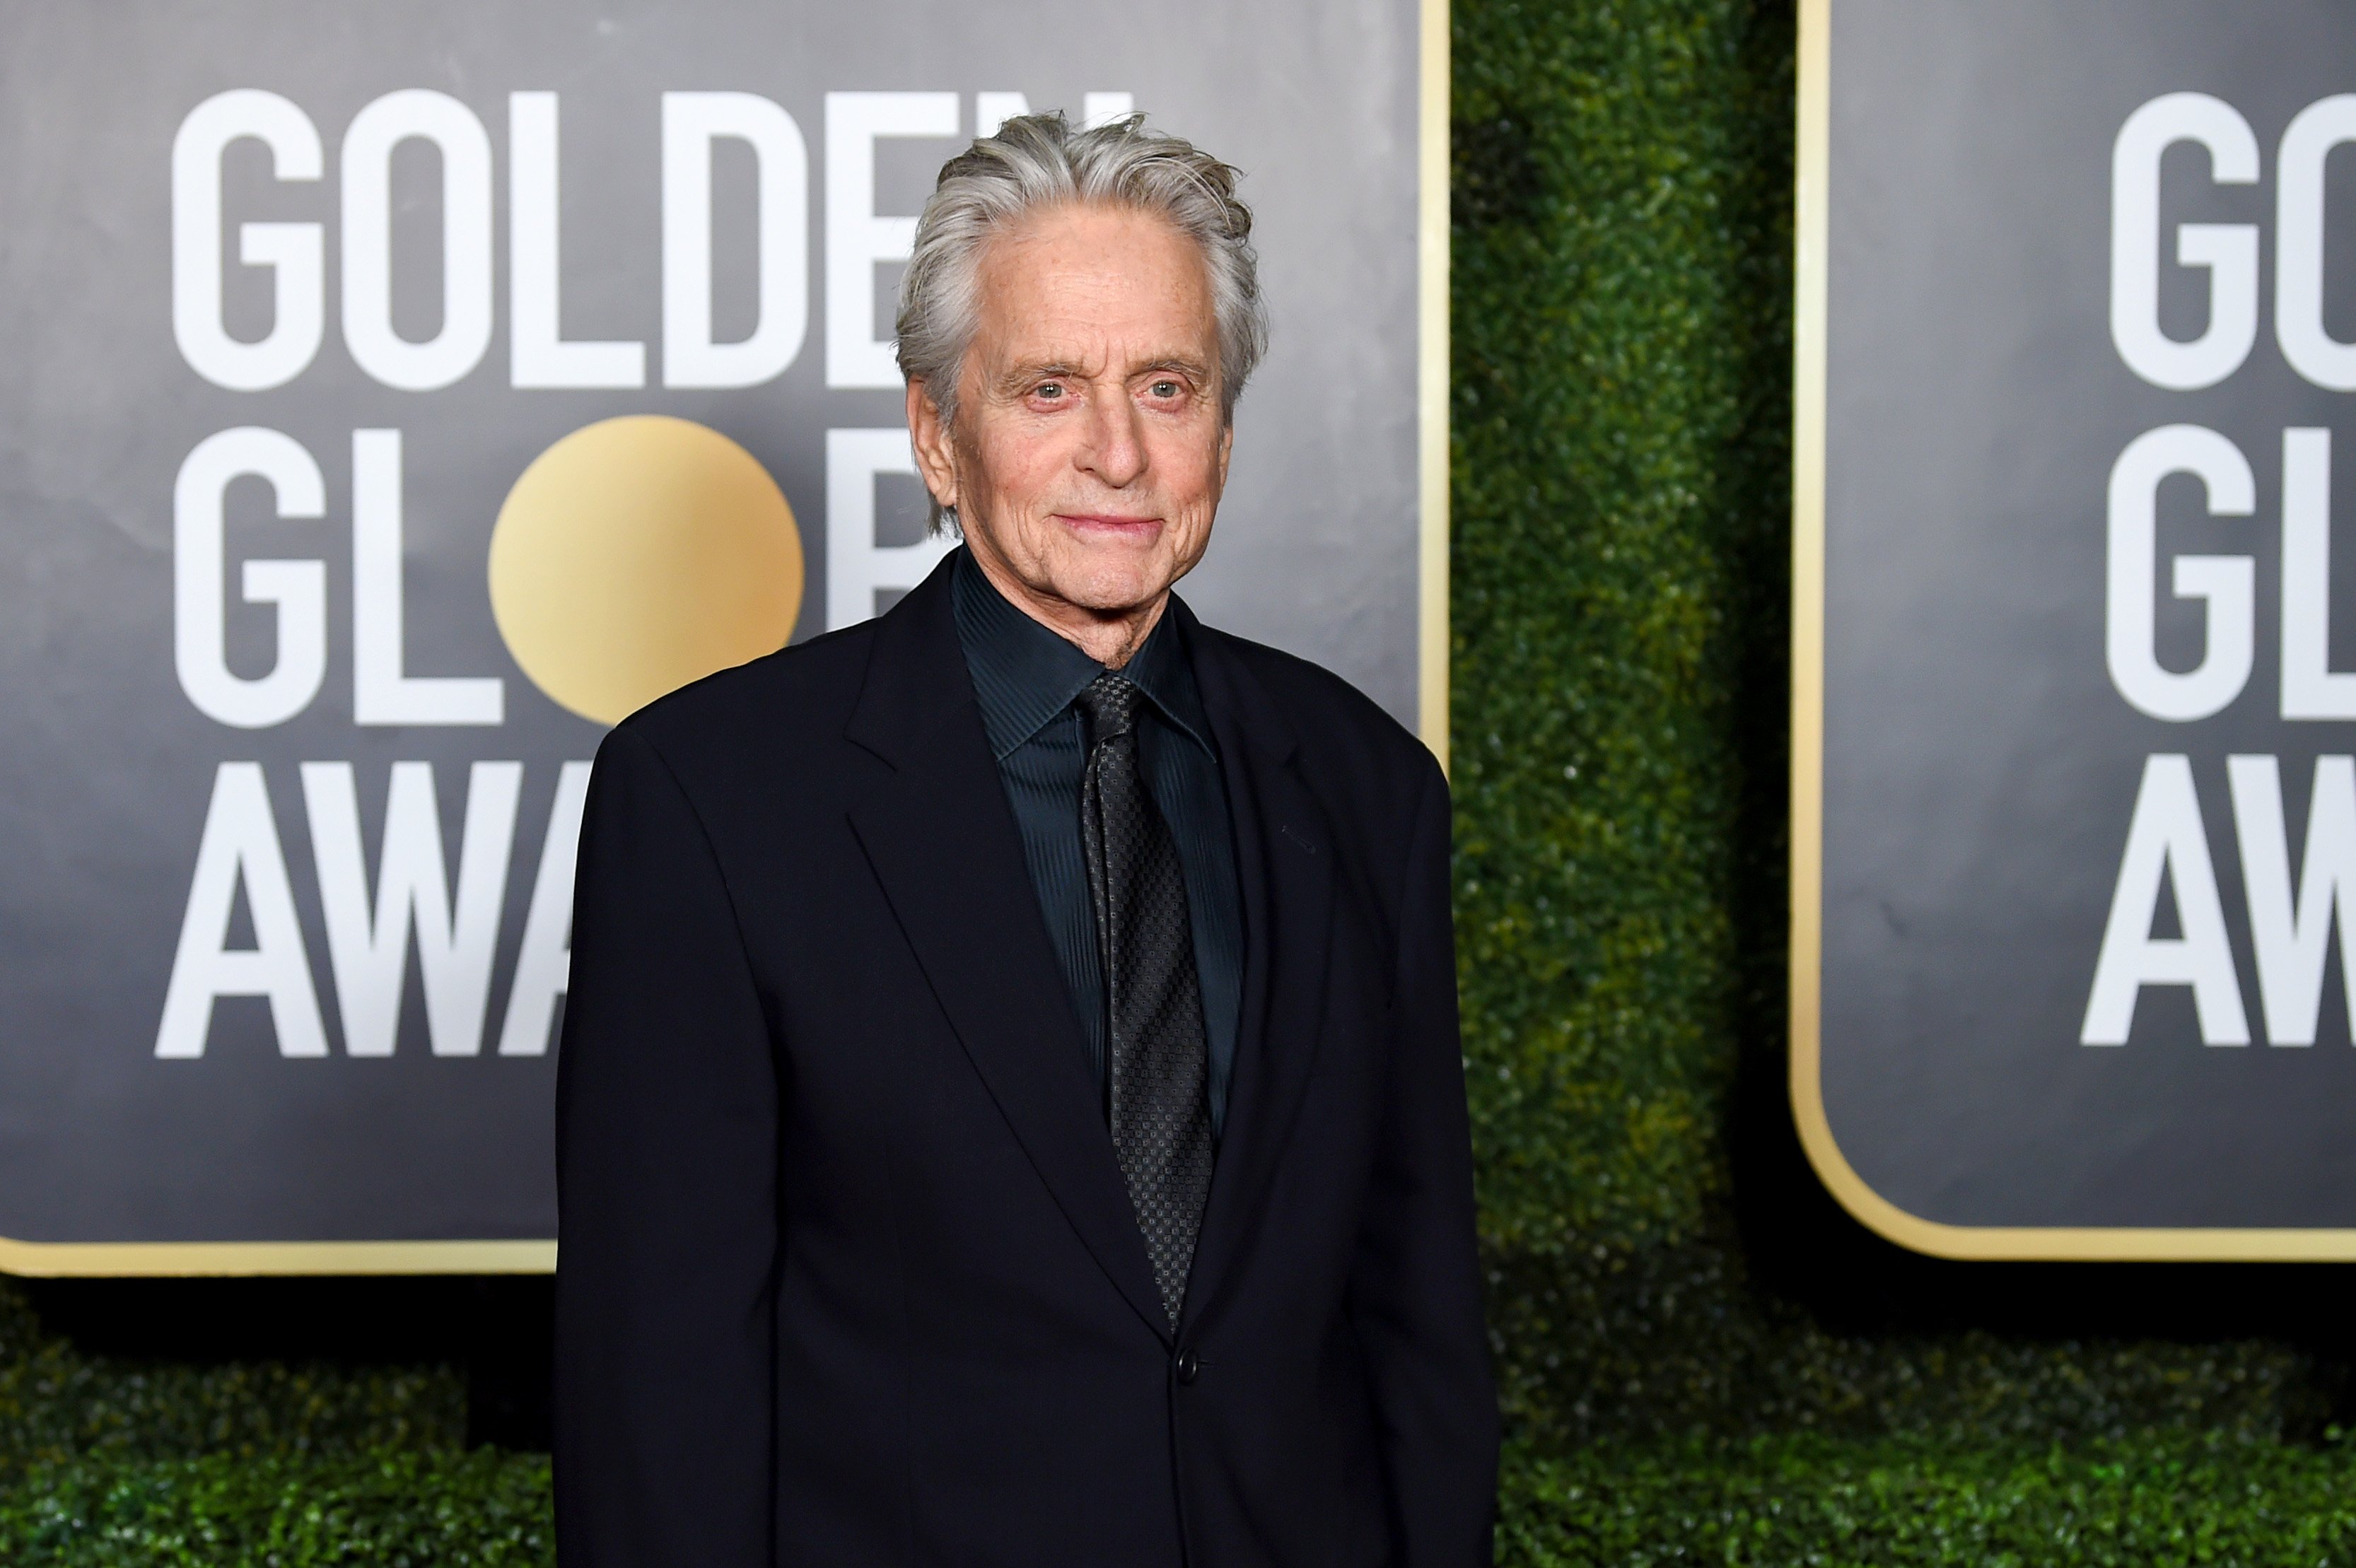 Michael Douglas attends the 78th Annual Golden Globe® Awards at The Rainbow Room on February 28, 2021 in New York City. | Source: Getty Images